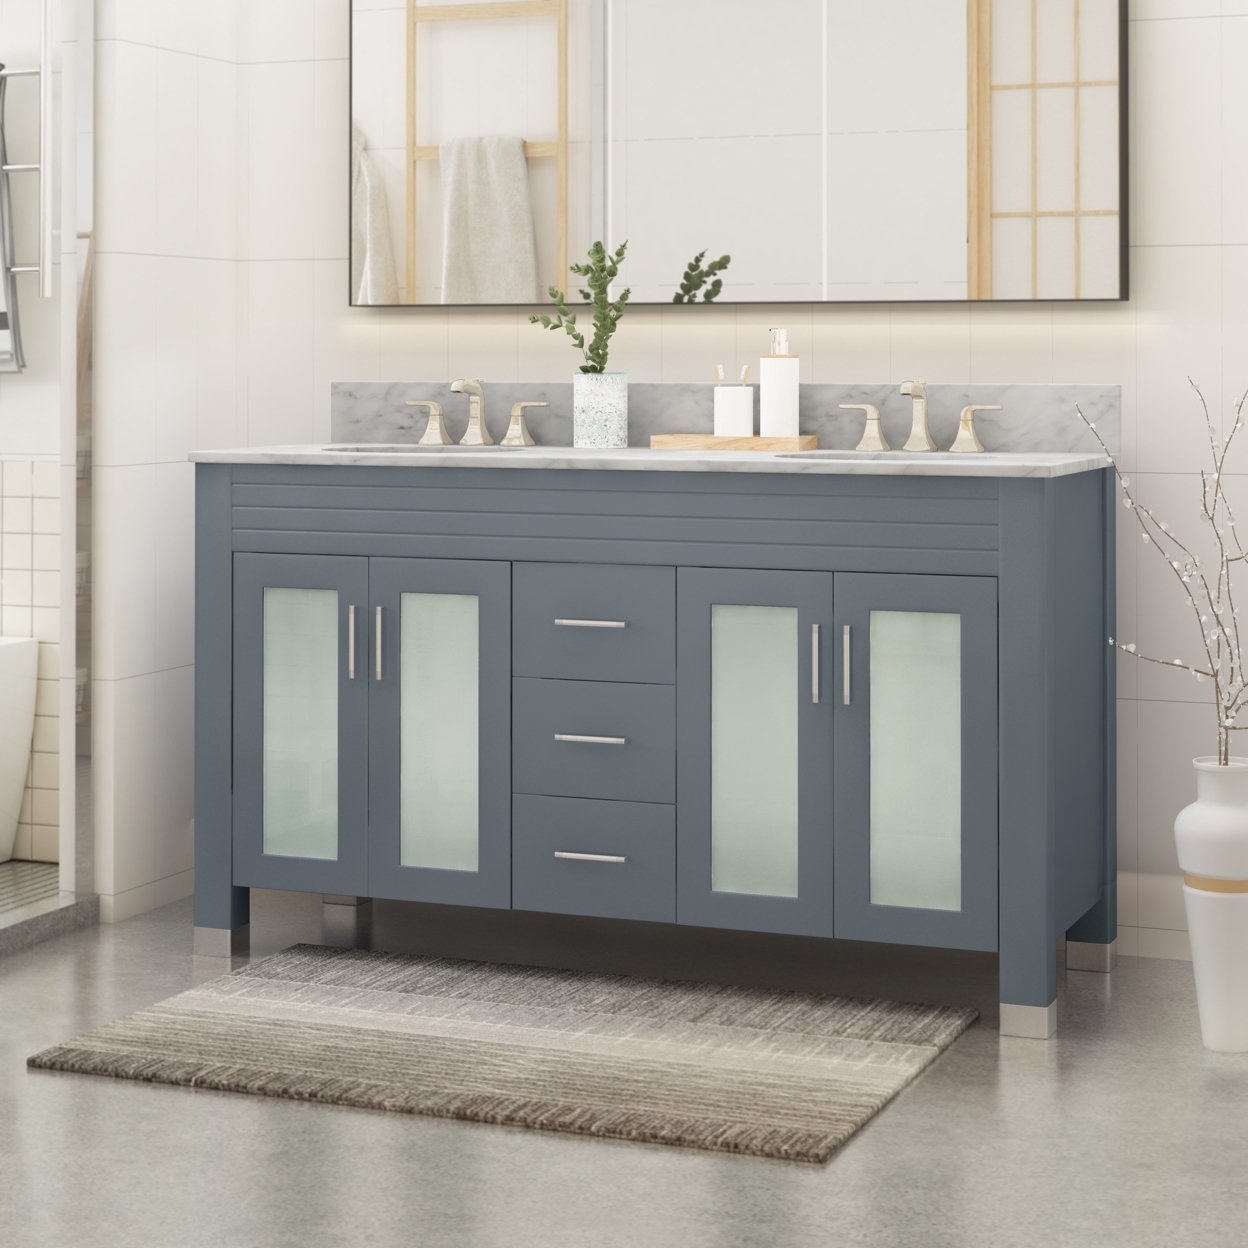 Holdame Contemporary 60 Wood Double Sink Bathroom Vanity With Marble Counter Top With Carrara White Marble - Gray